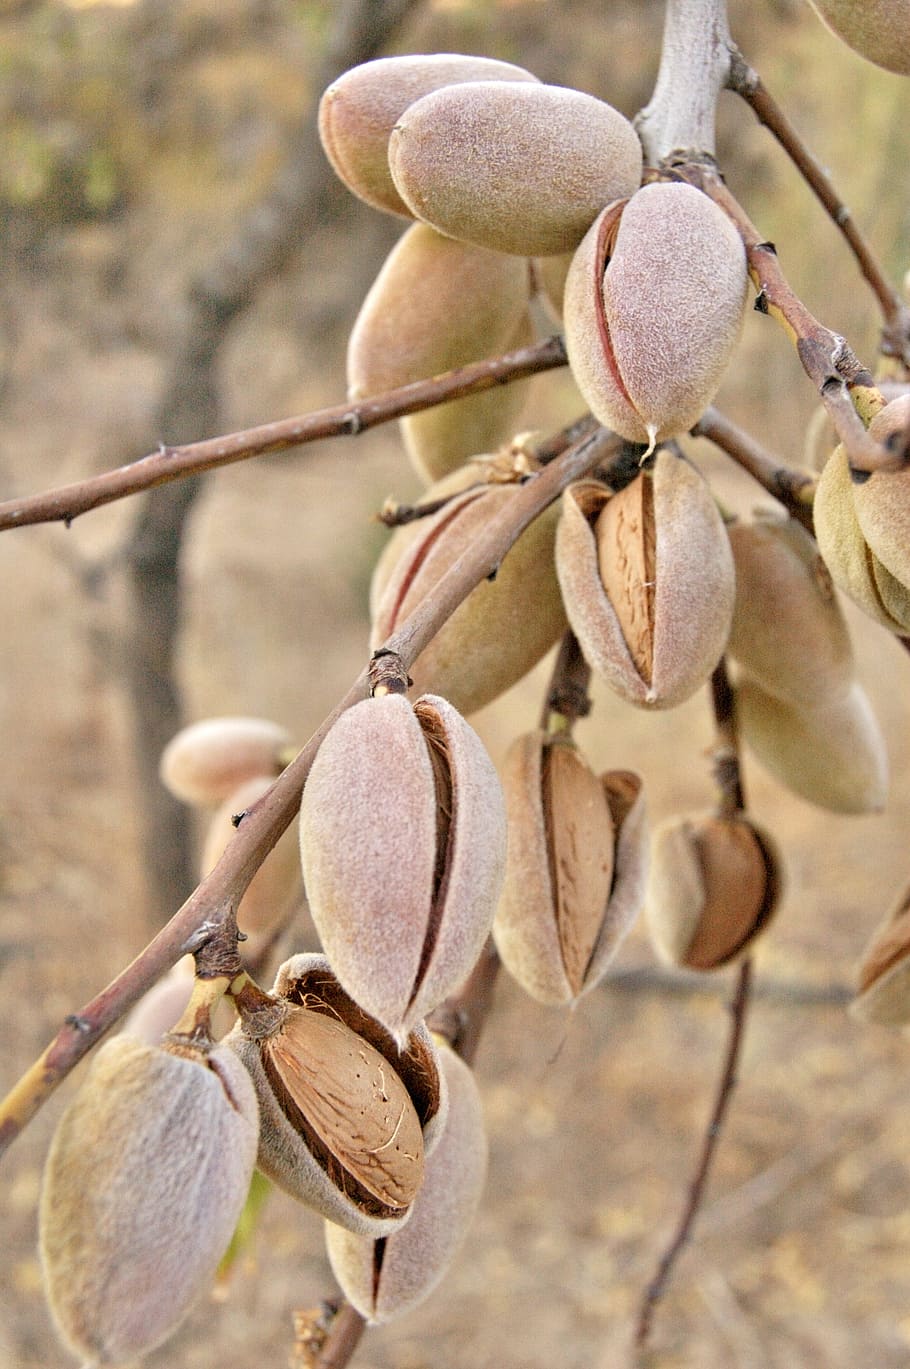 nature, almonds, dried fruits, close-up, focus on foreground, growth, plant, beauty in nature, day, branch